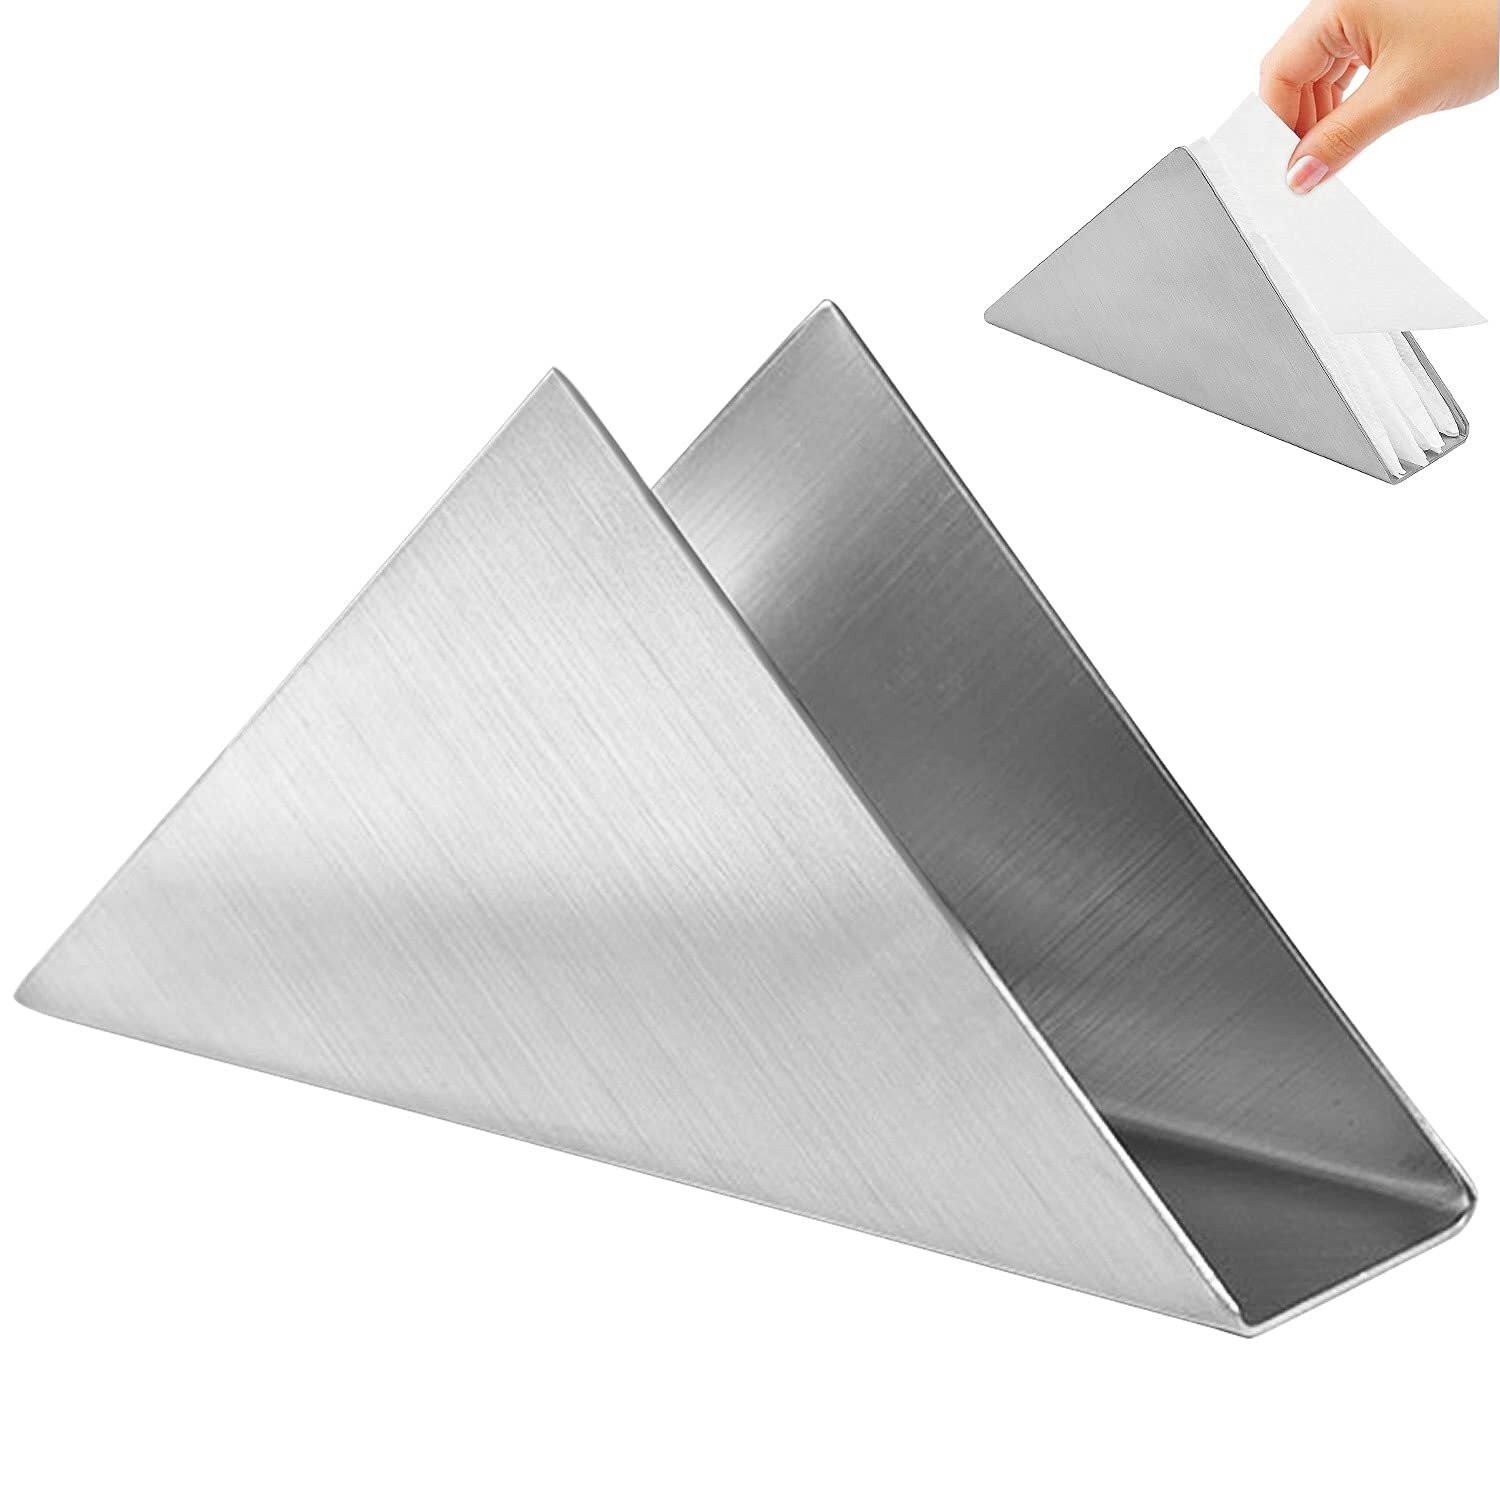 Triangular Napkin Holder, Stainless Steel Napkin Holder for Kitchen Countertops, Dining Tables, Picnic Tables (Silver)